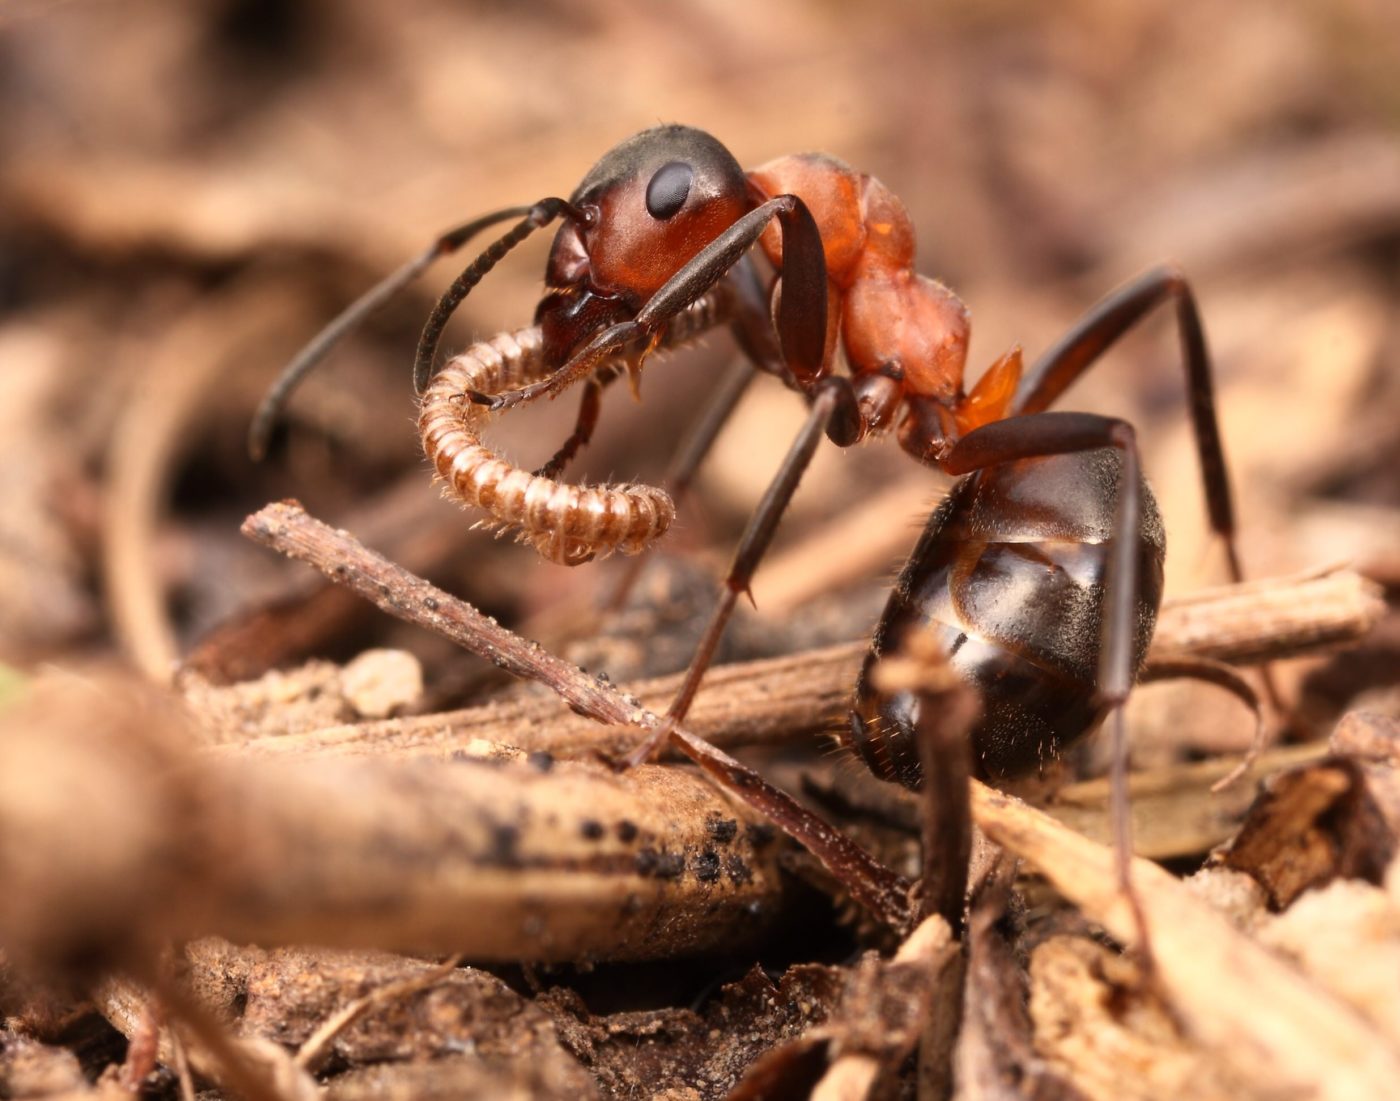 This wood ant (Formica sp.) has captured a small millipede on vegetation litter near Brno in the Czech Republic.